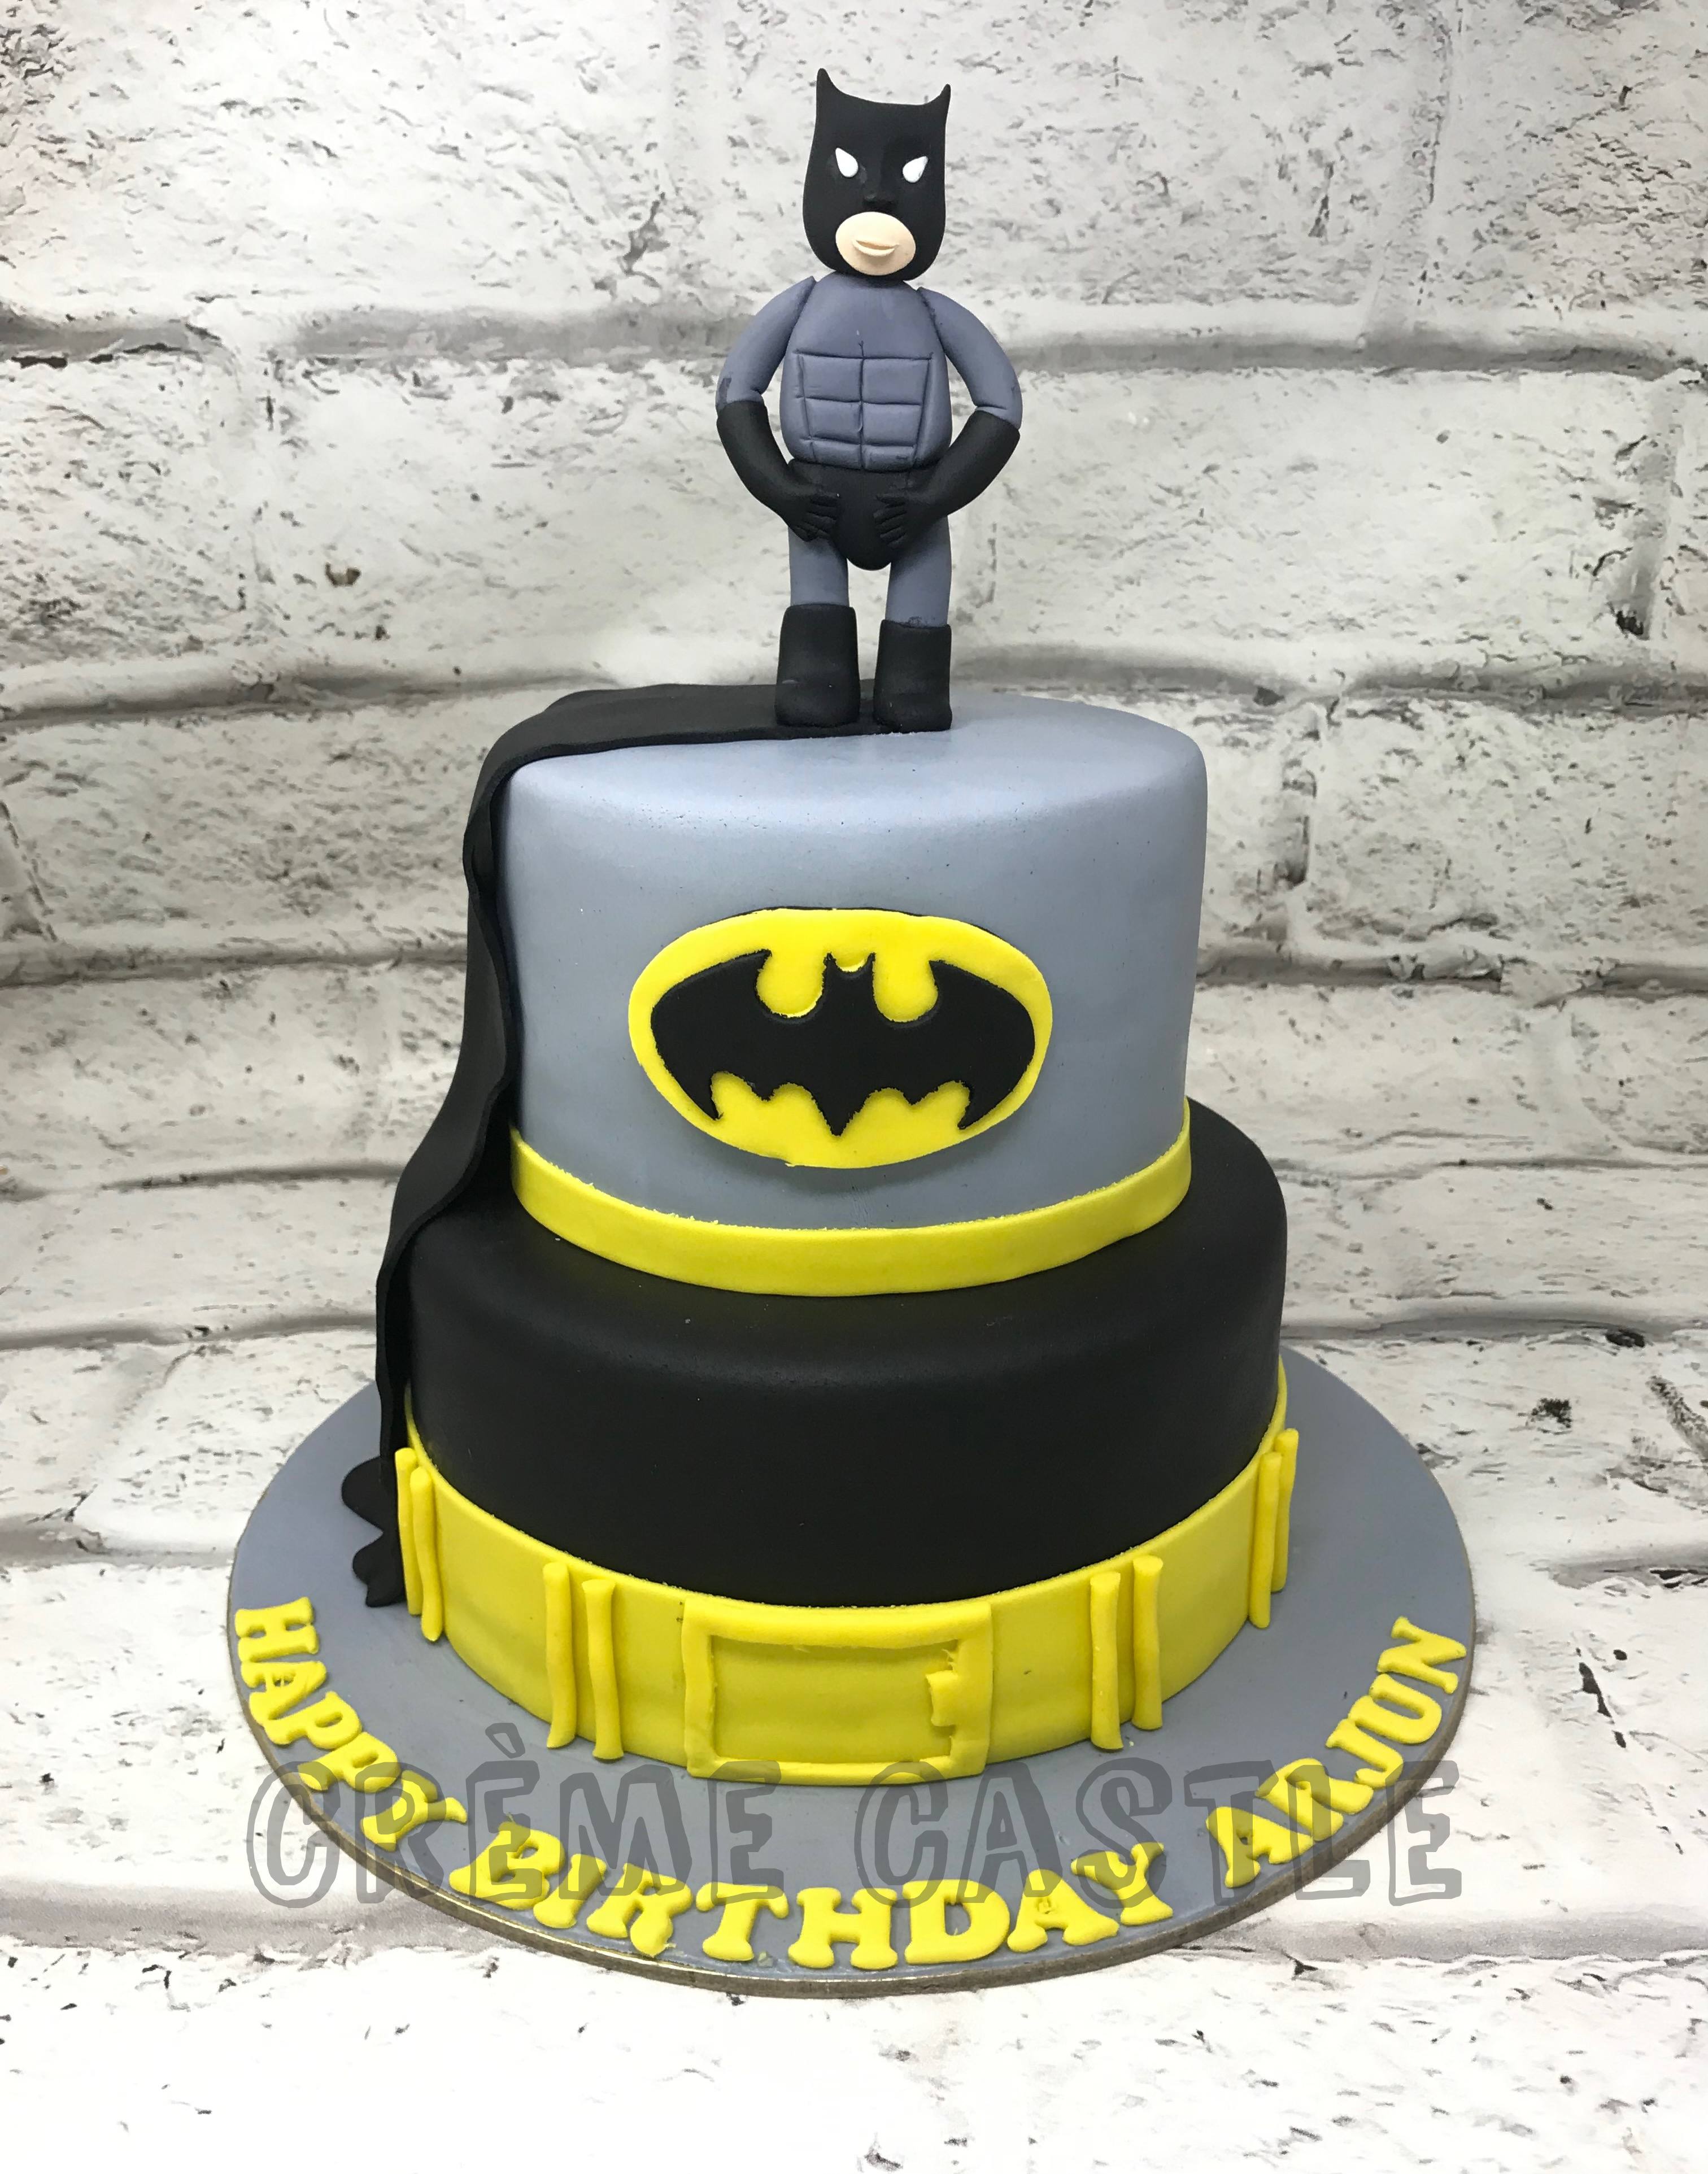 Batman Chocolate Cake With Chocolate Buttercream Icing - CakeCentral.com